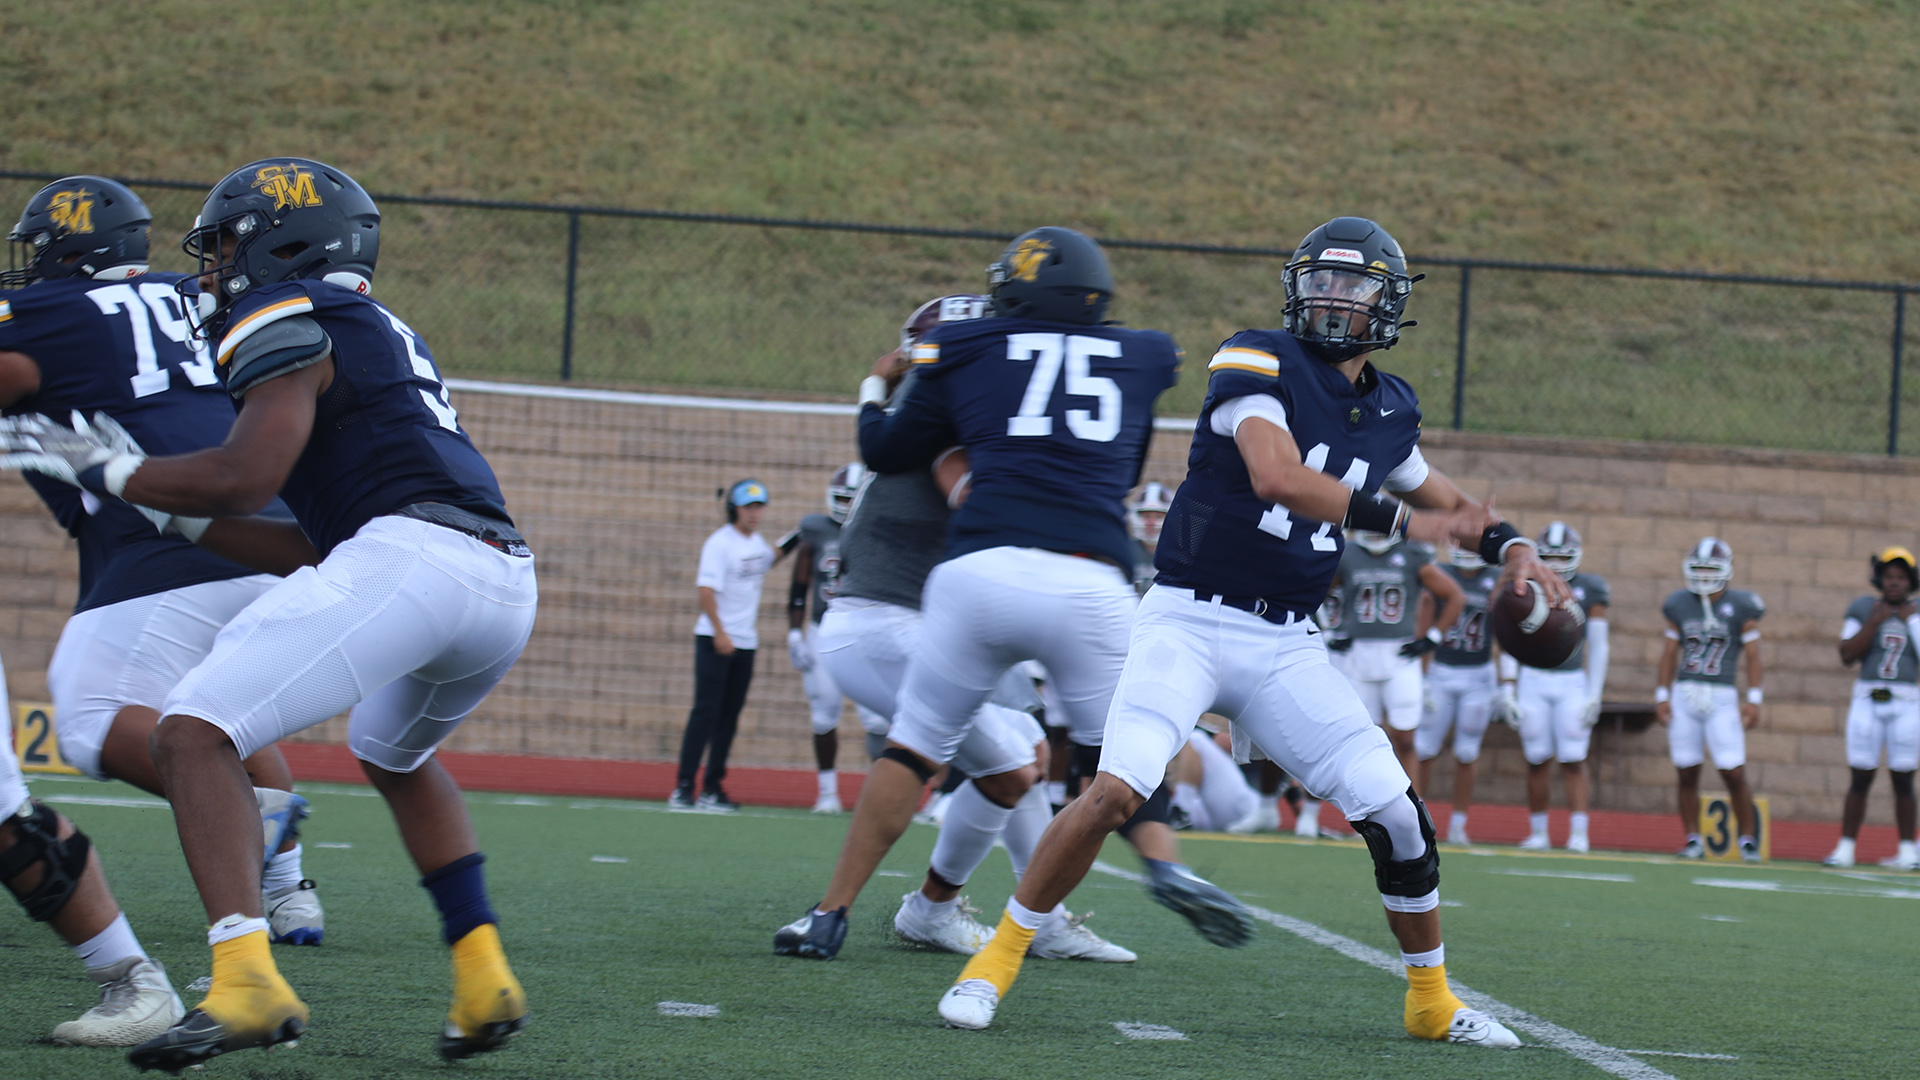 Covington Has Six Touchdowns in 57-18 Win Over Swedes